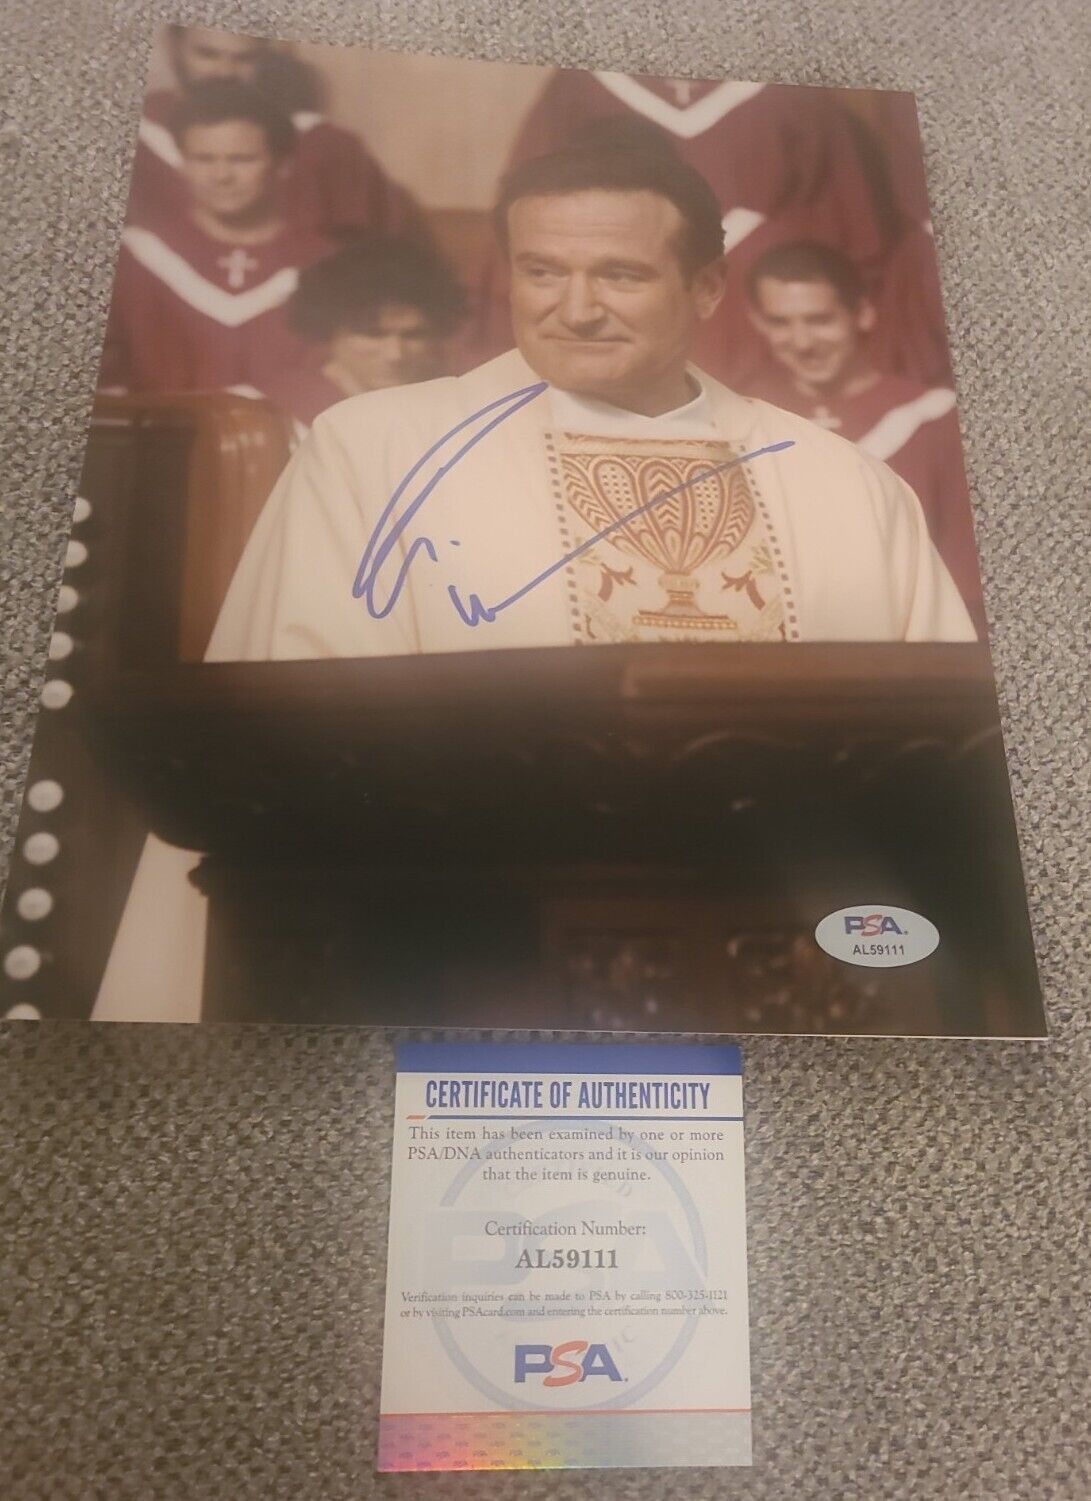 ROBIN WILLIAMS SIGNED 8X10 PHOTO LICENSE TO WED PSA/DNA AUTHENTIC #AL59111 RARE